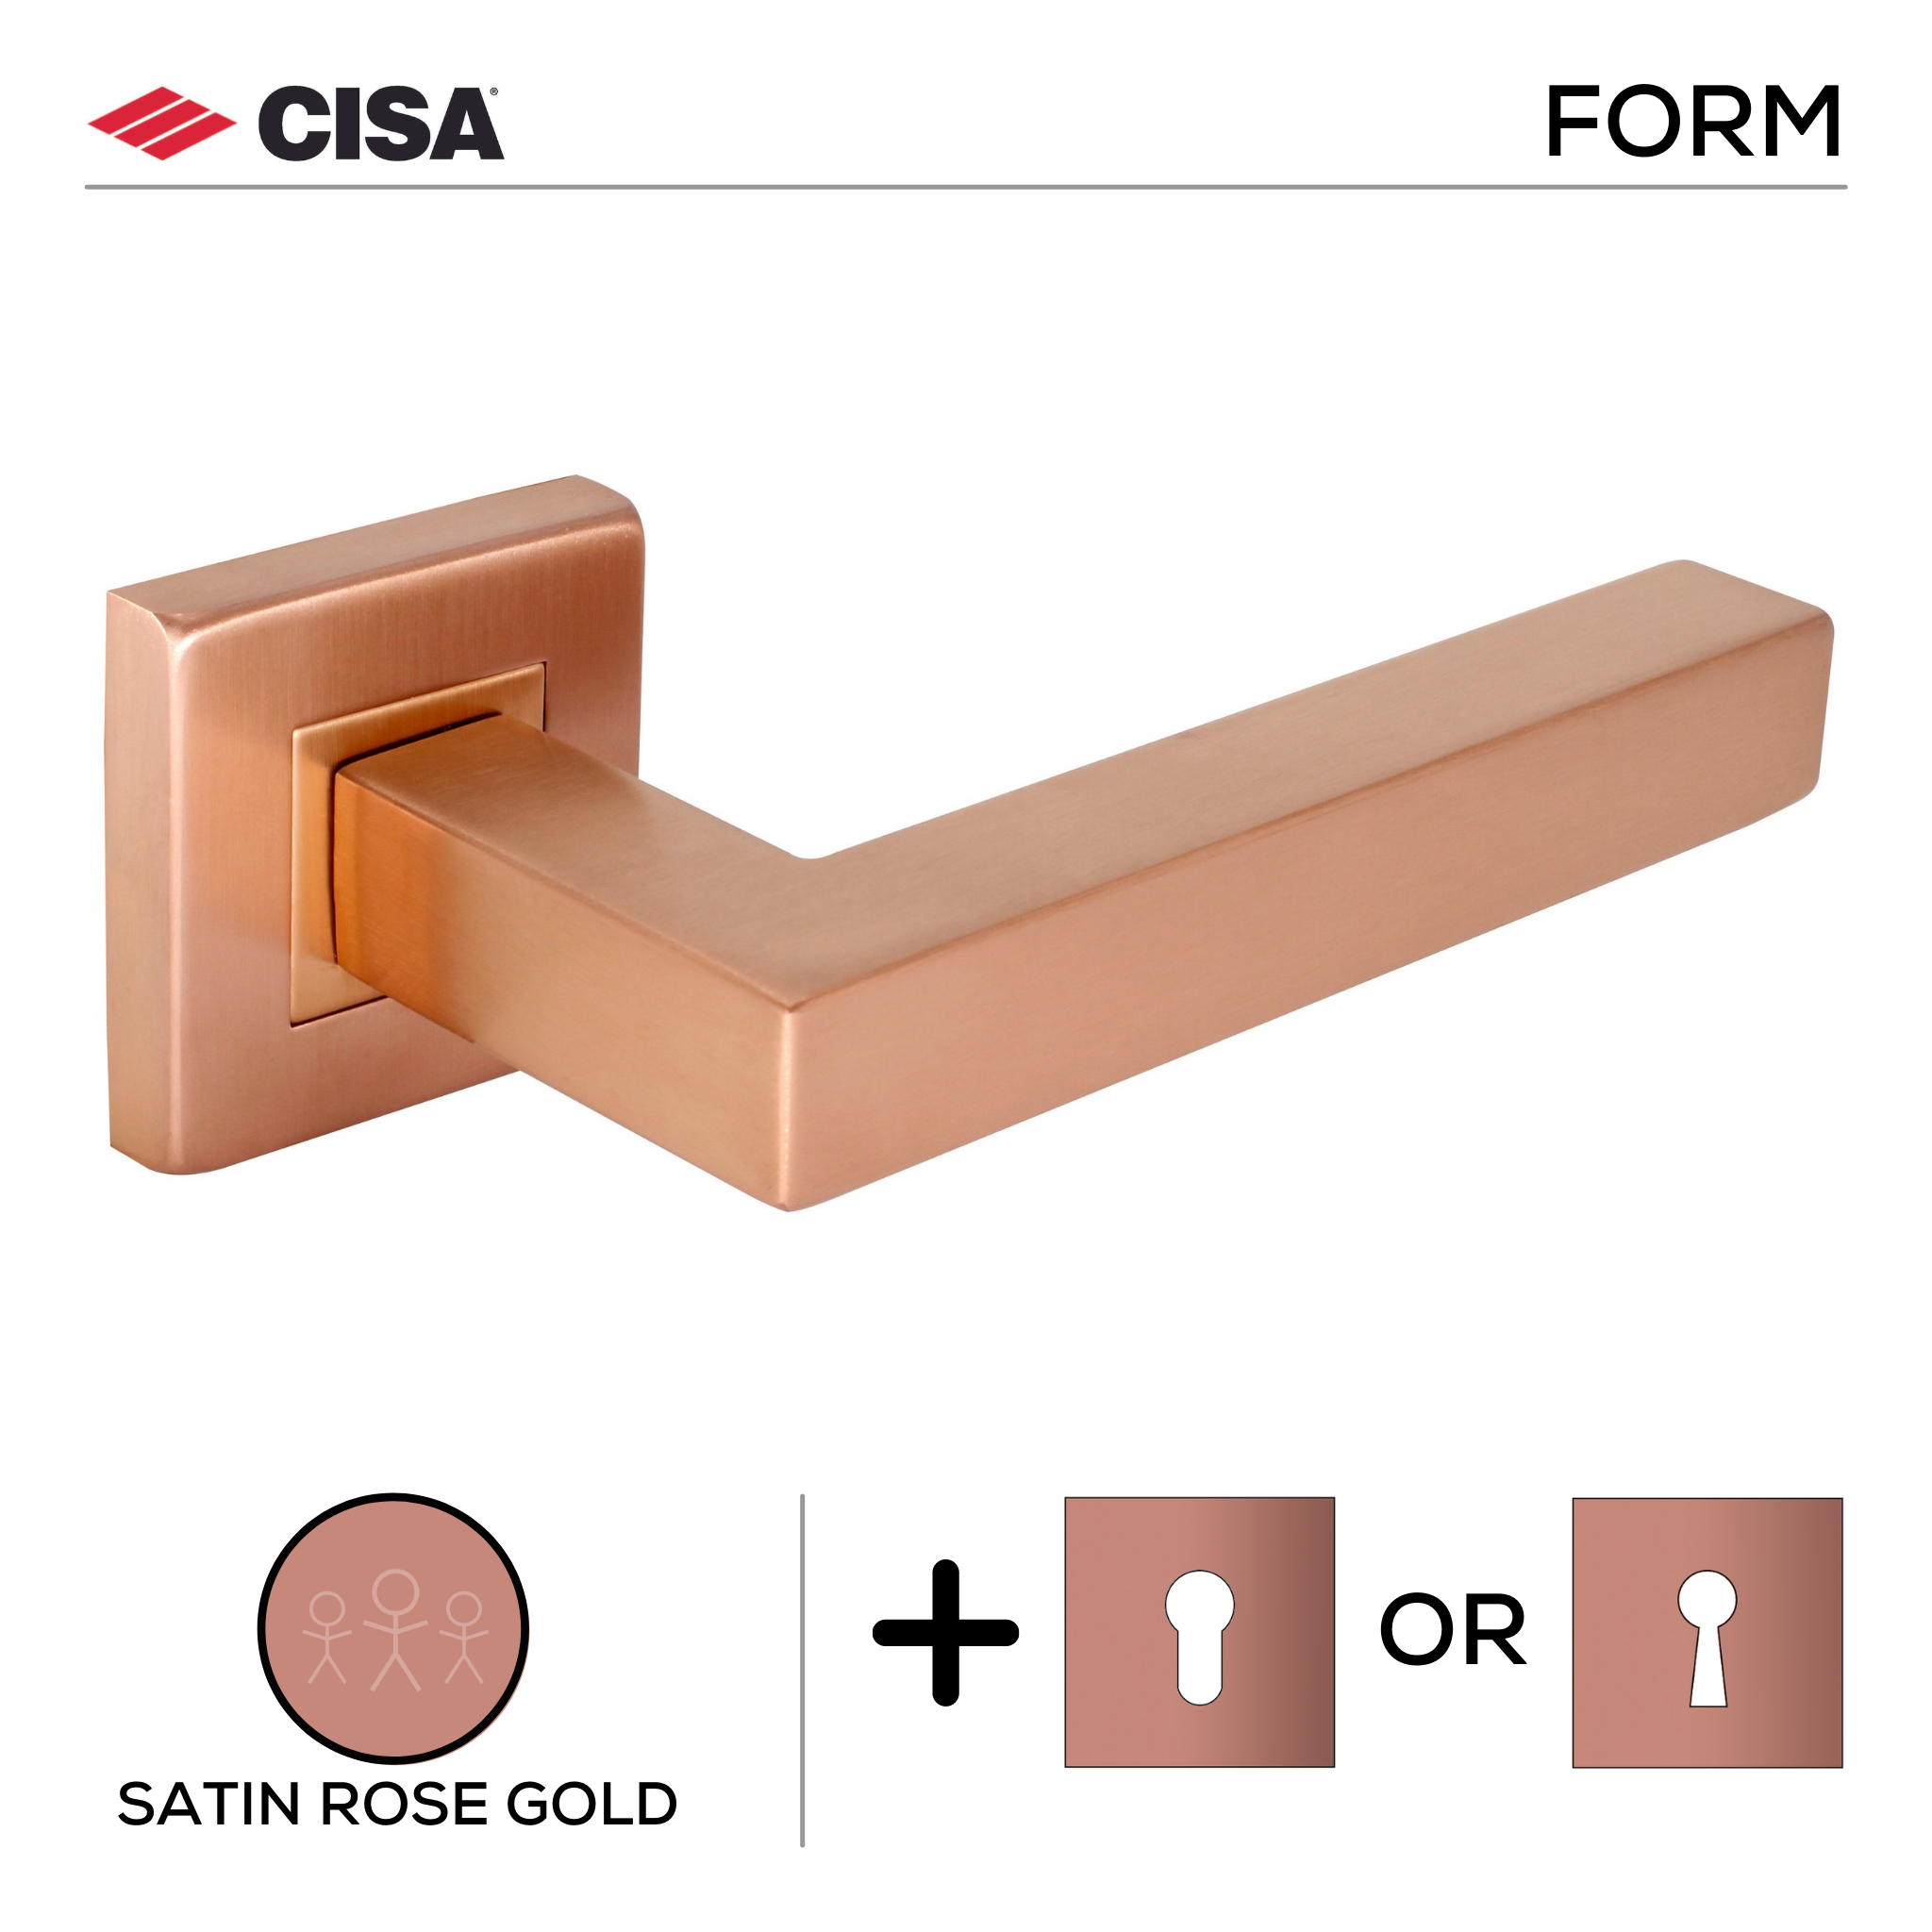 FS201.S._.SRG, Lever Handles, Form, On Square Rose, With Escutcheons, Satin Rose Gold, CISA